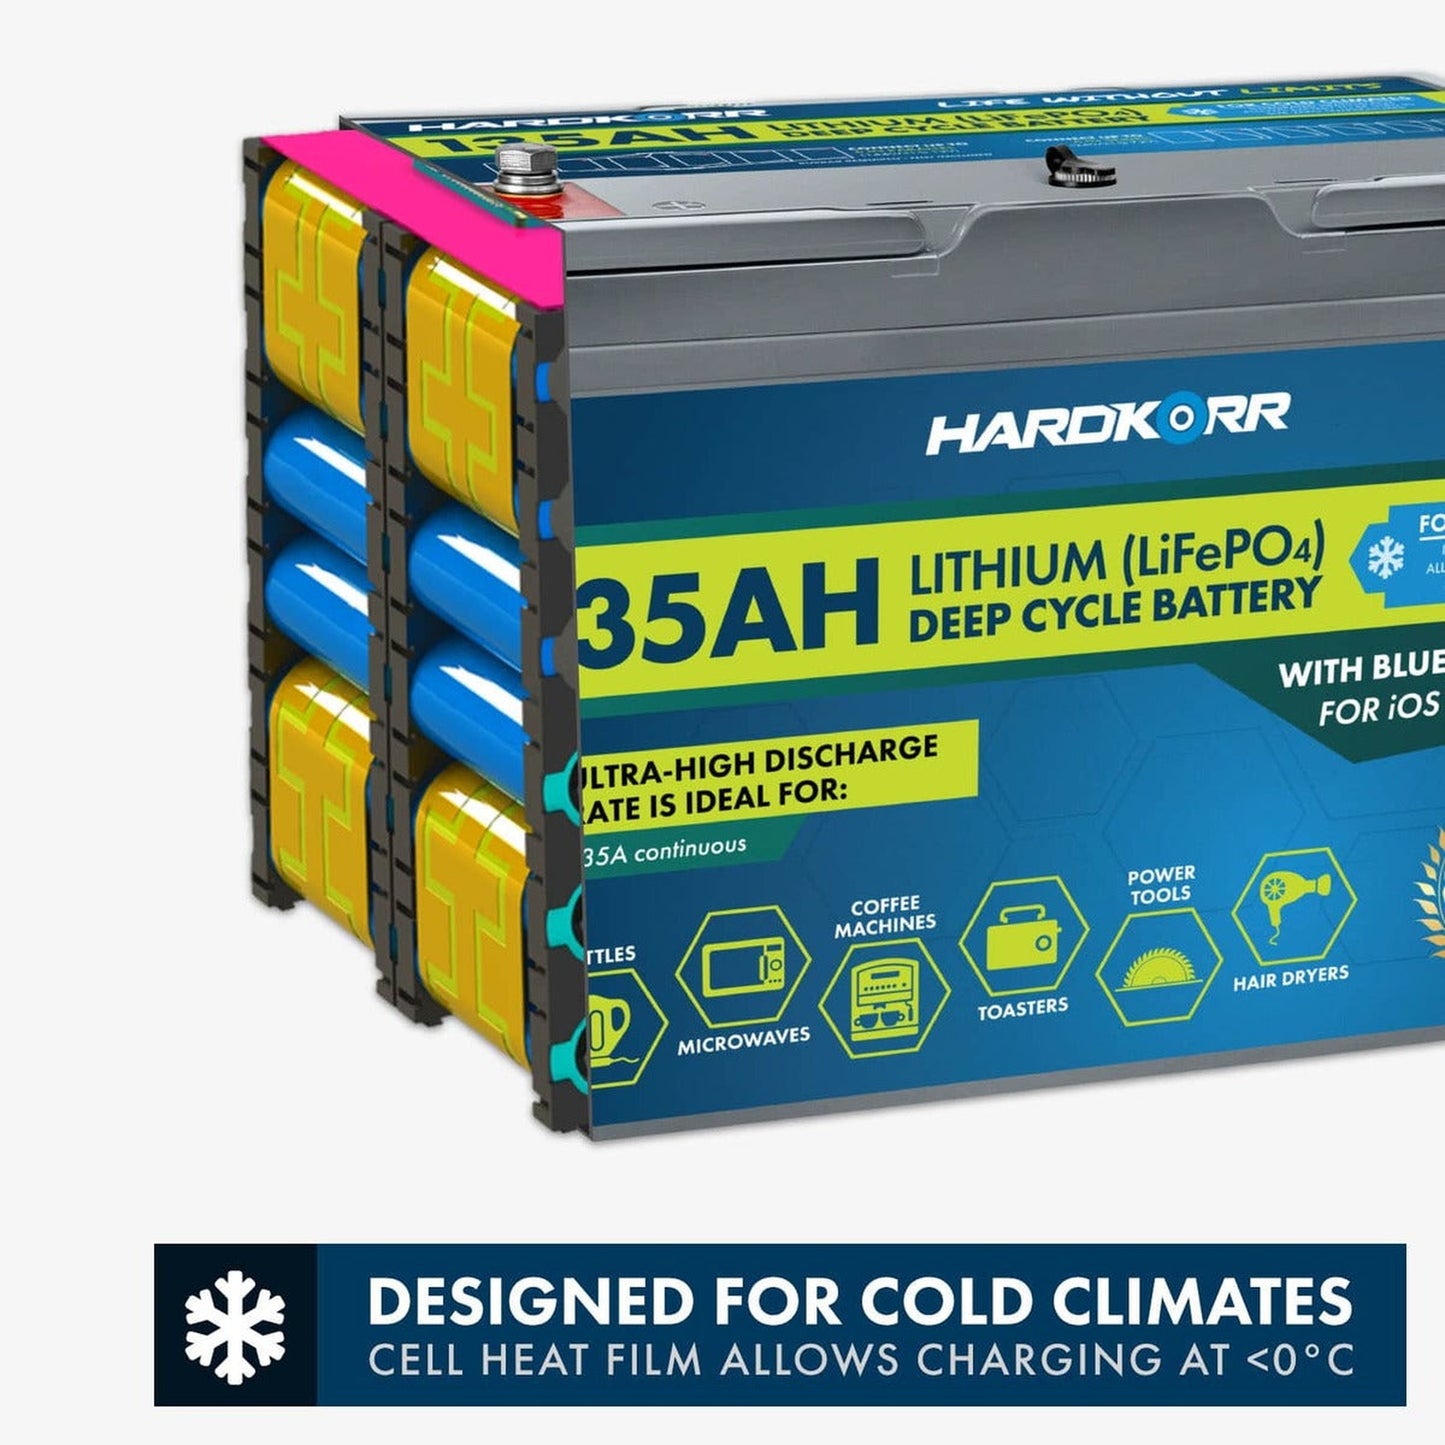 Hard Korr 135Ah Cold Climate Lithium (LiFePO4) Deep Cycle Battery w/Bluetooth